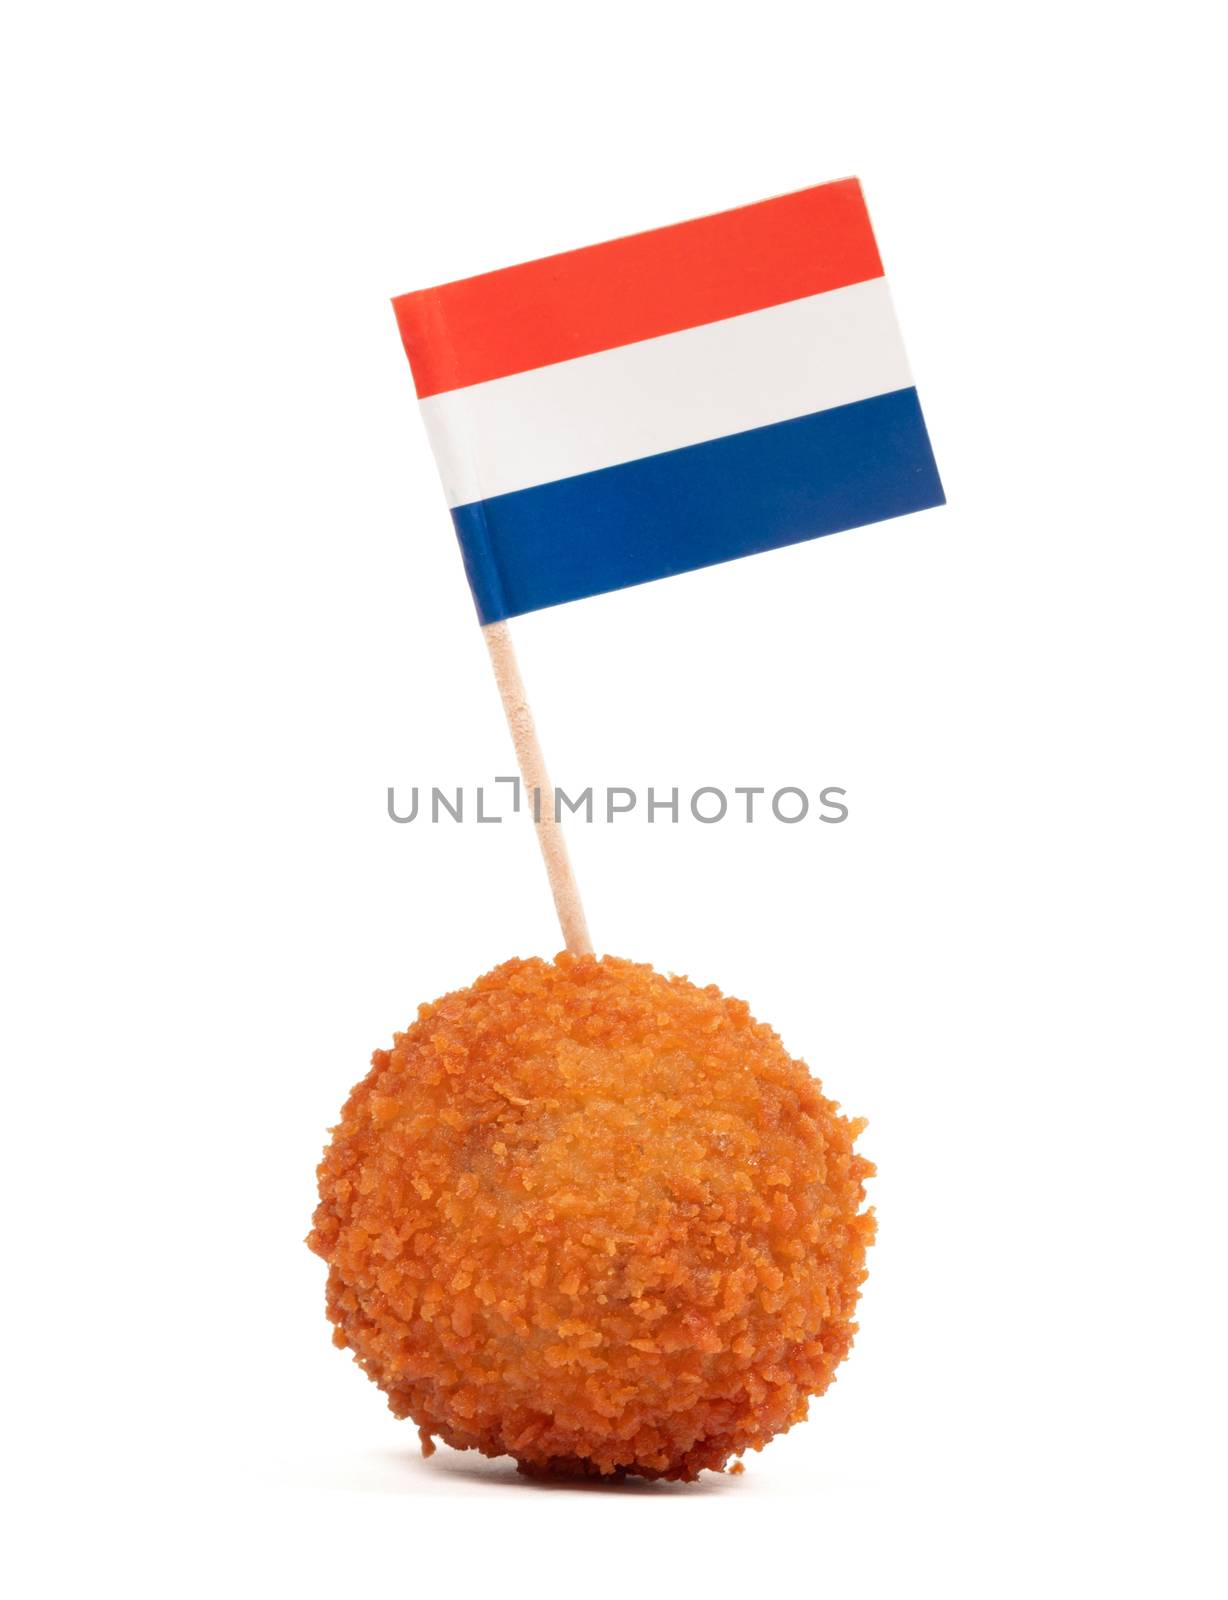 Single dutch traditional snack bitterbal with a dutch flag, isolated